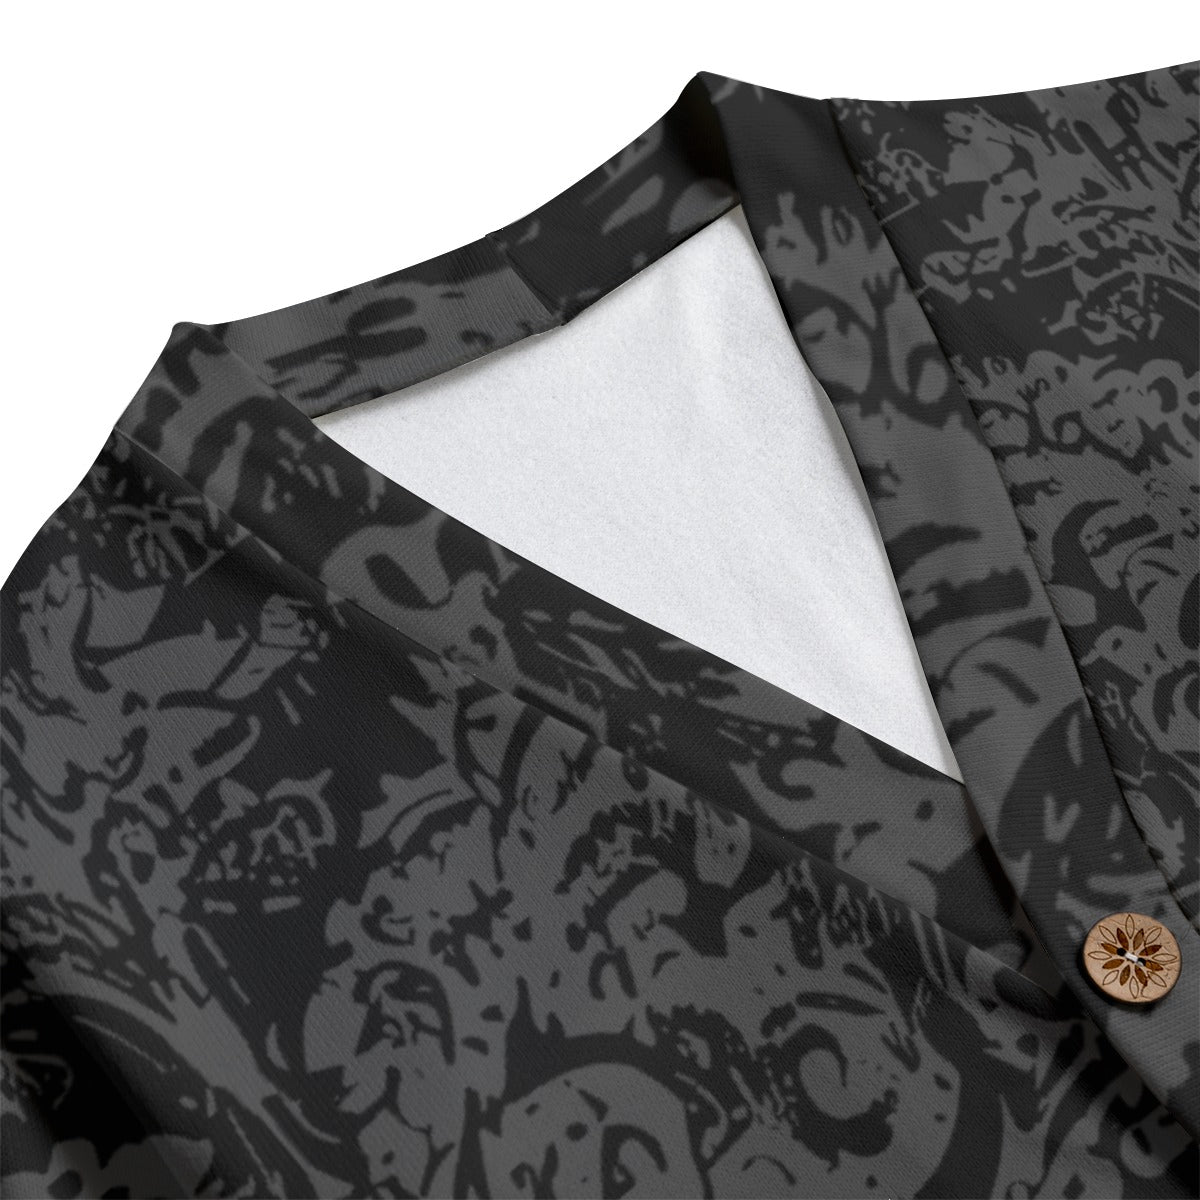 Vampire Art Grunge Damask in Black & Charcoal Unisex V-neck Knitted Fleece Cardigan With Buttons